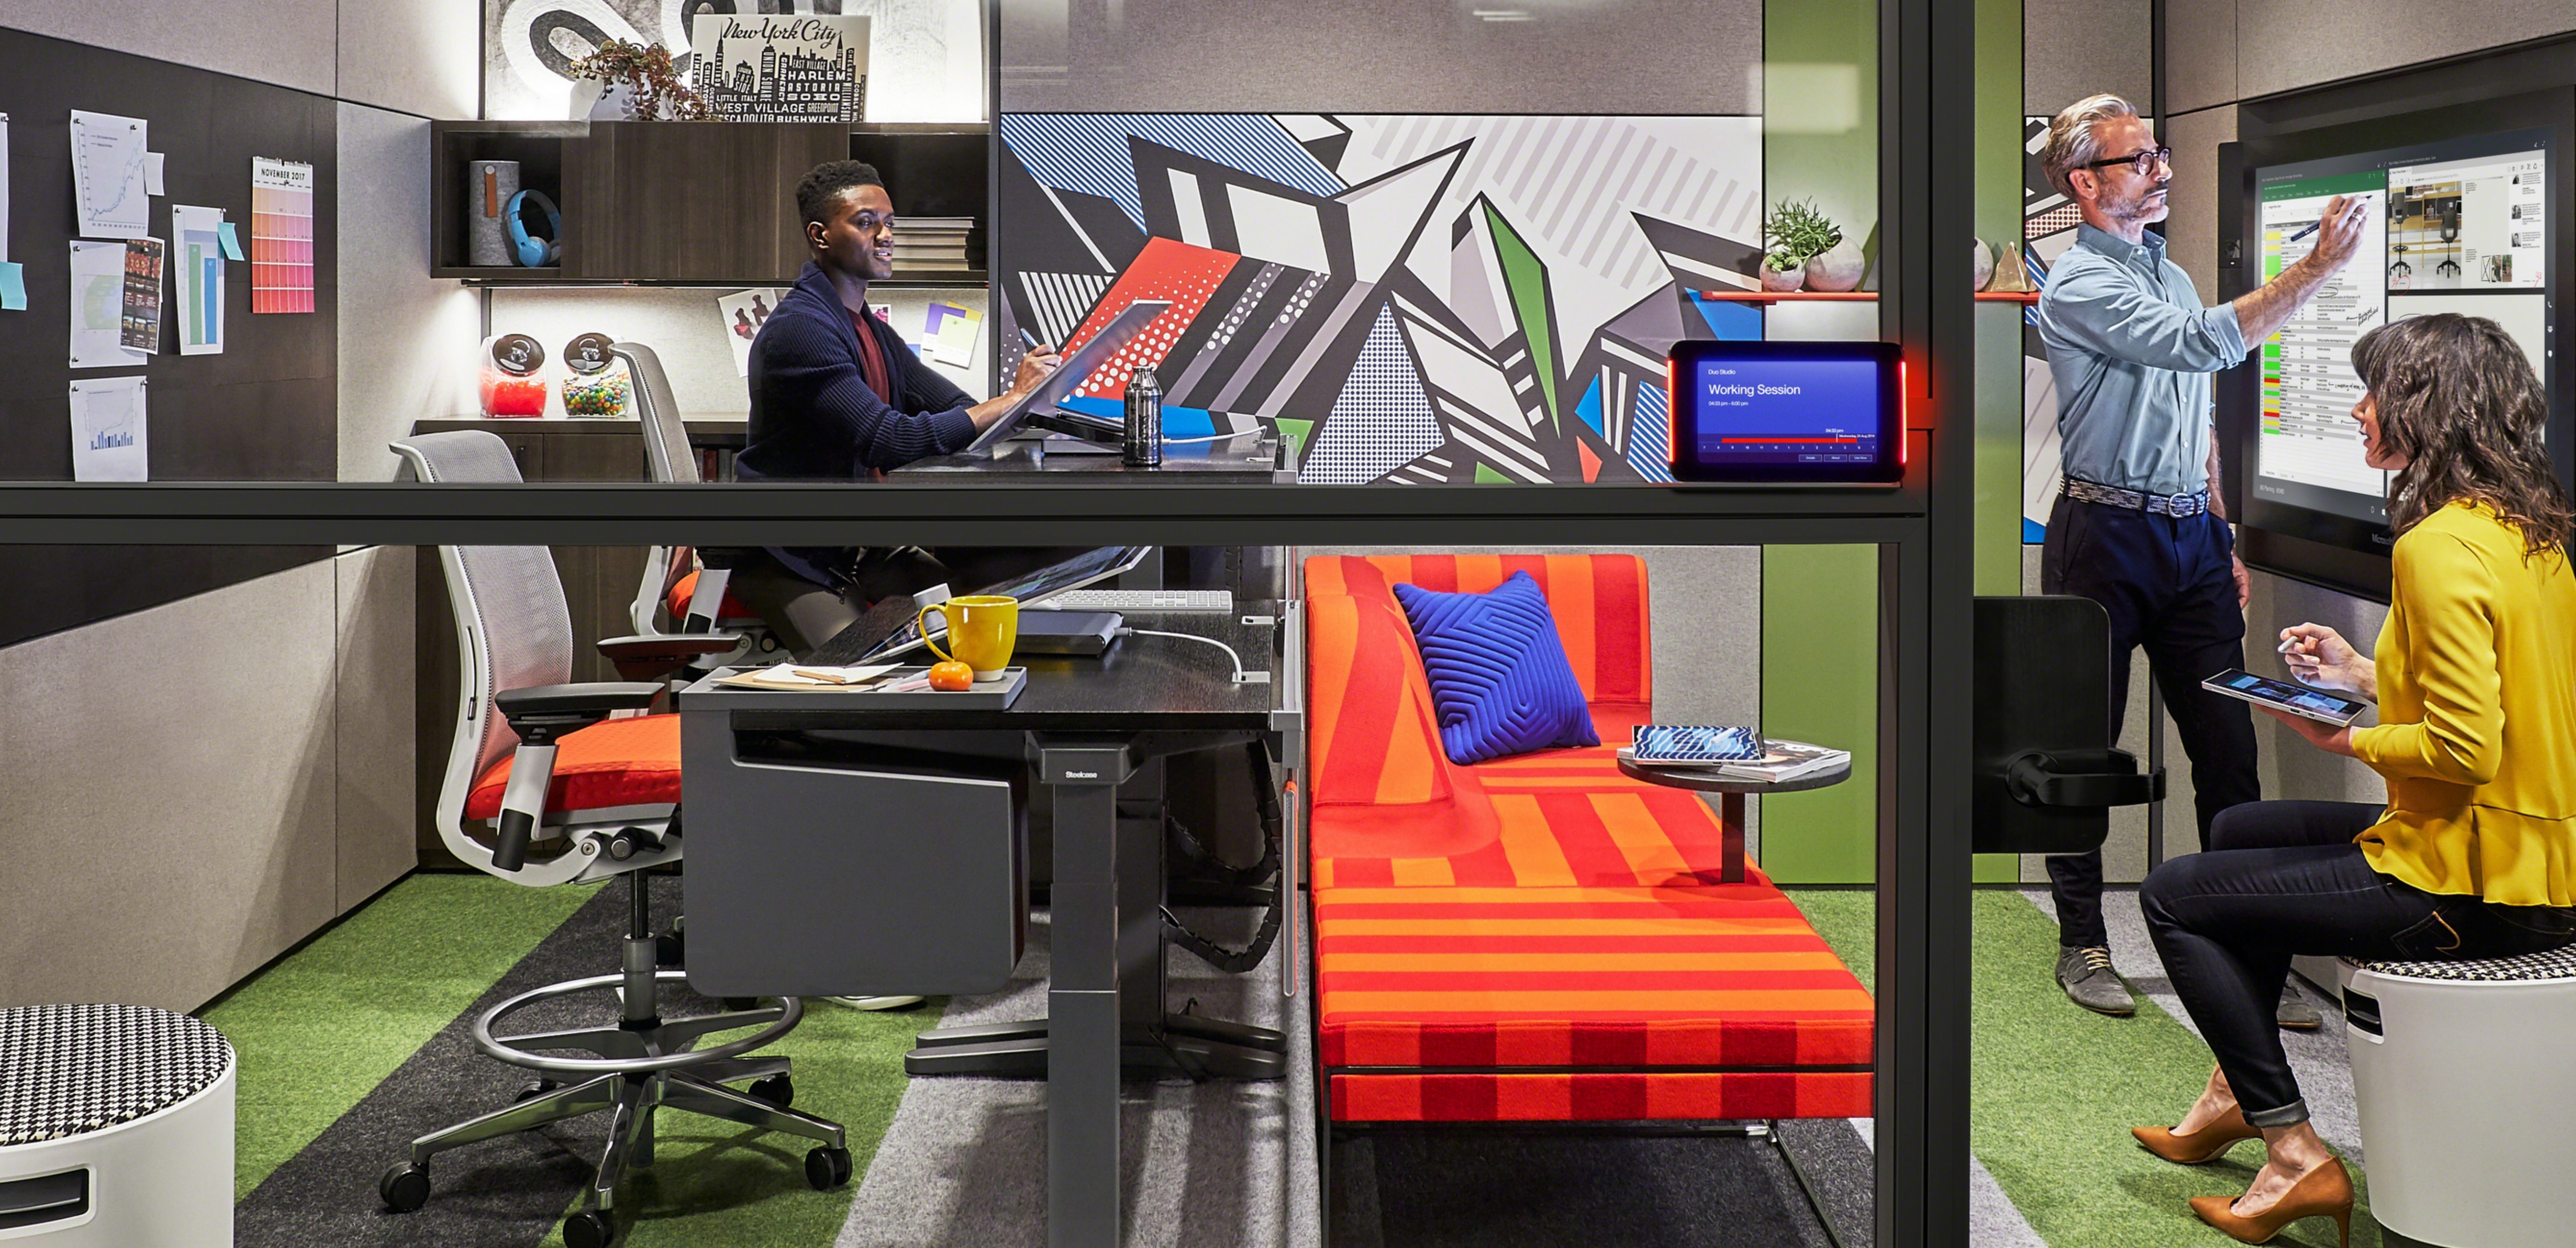 Steelcase and Microsoft believe that a thoughtfully designed workplace – that brings together the right mix of Technology and Space design- can unlock the creative potential of individuals and teams, stimulate ideas and accelerate business transformation.